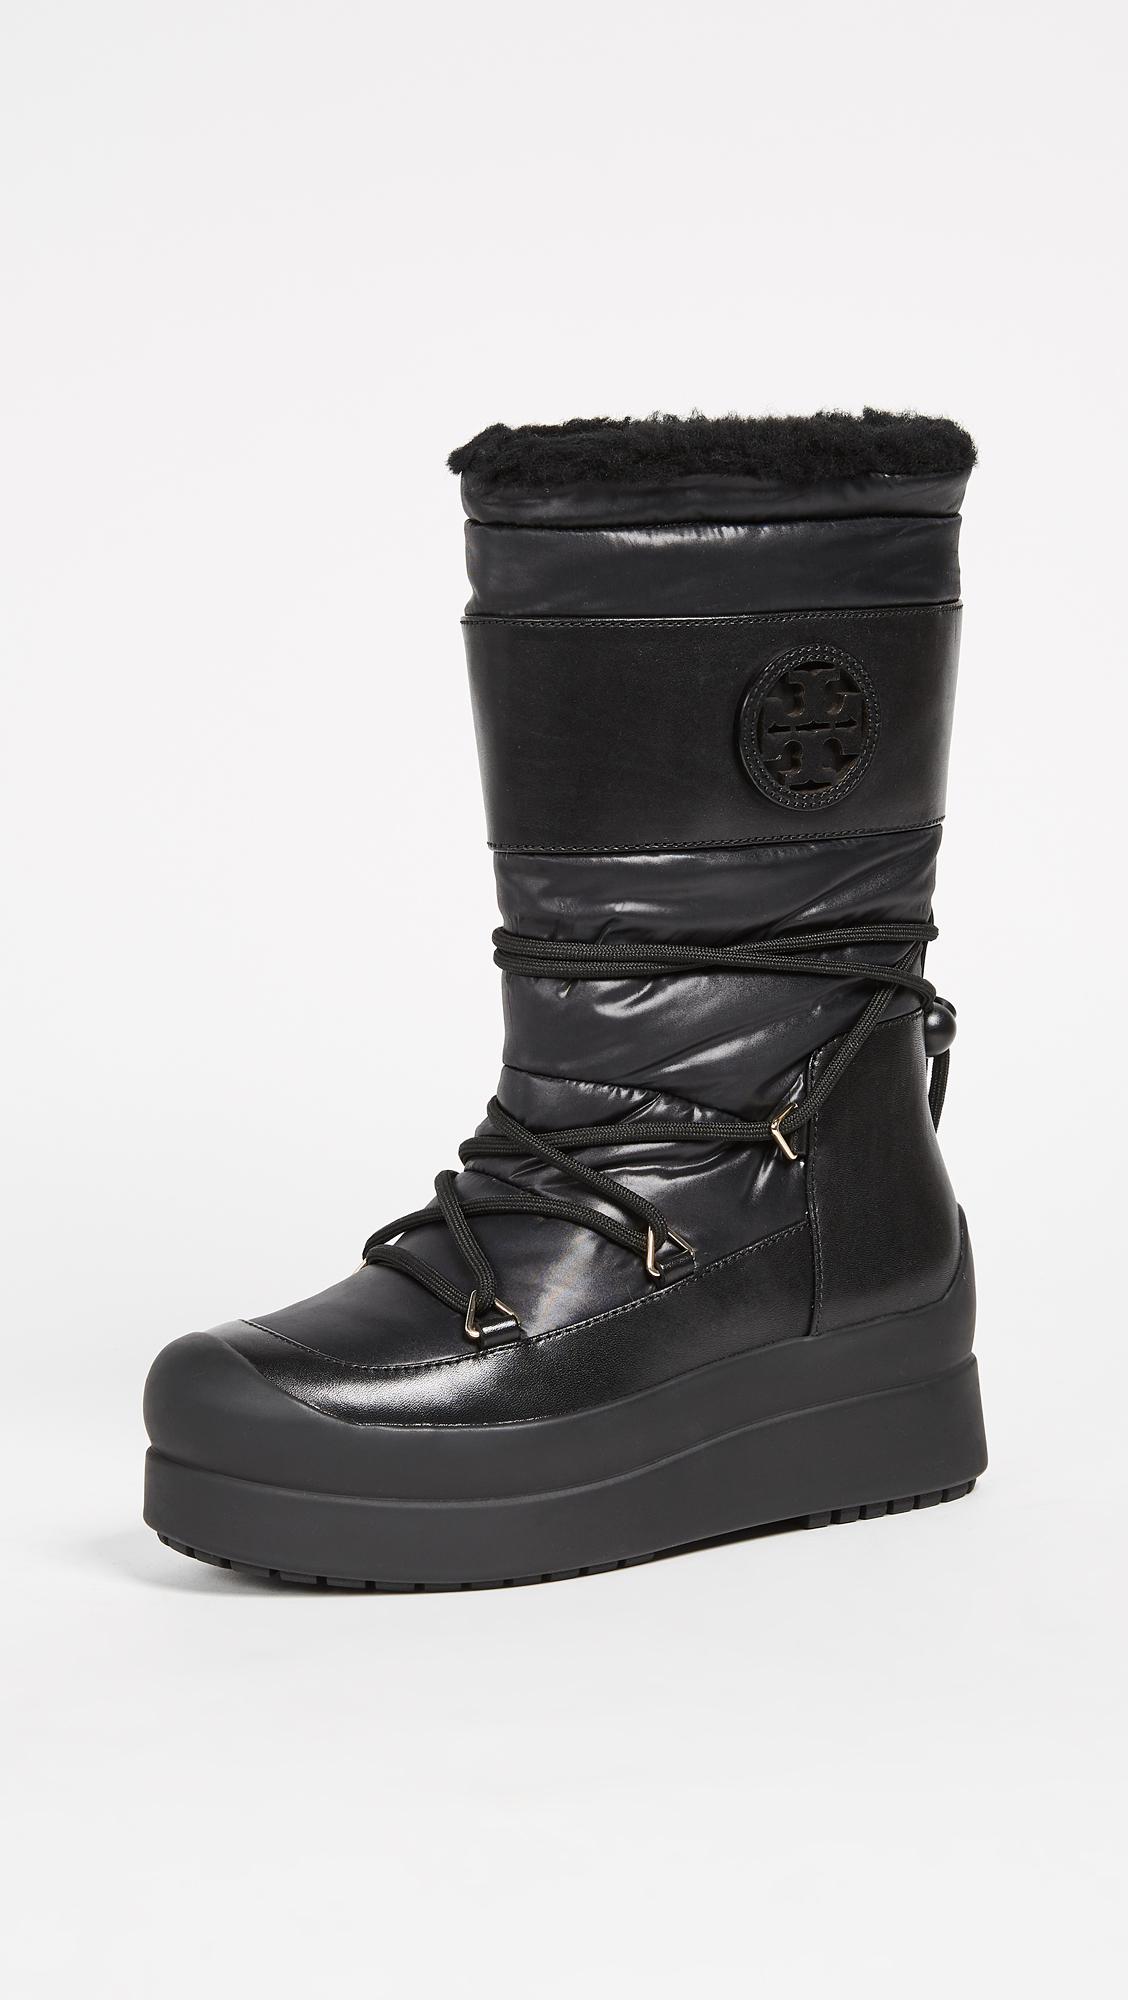 Tory Burch Synthetic Cliff Snow Boots in Black/Black (Black) - Lyst